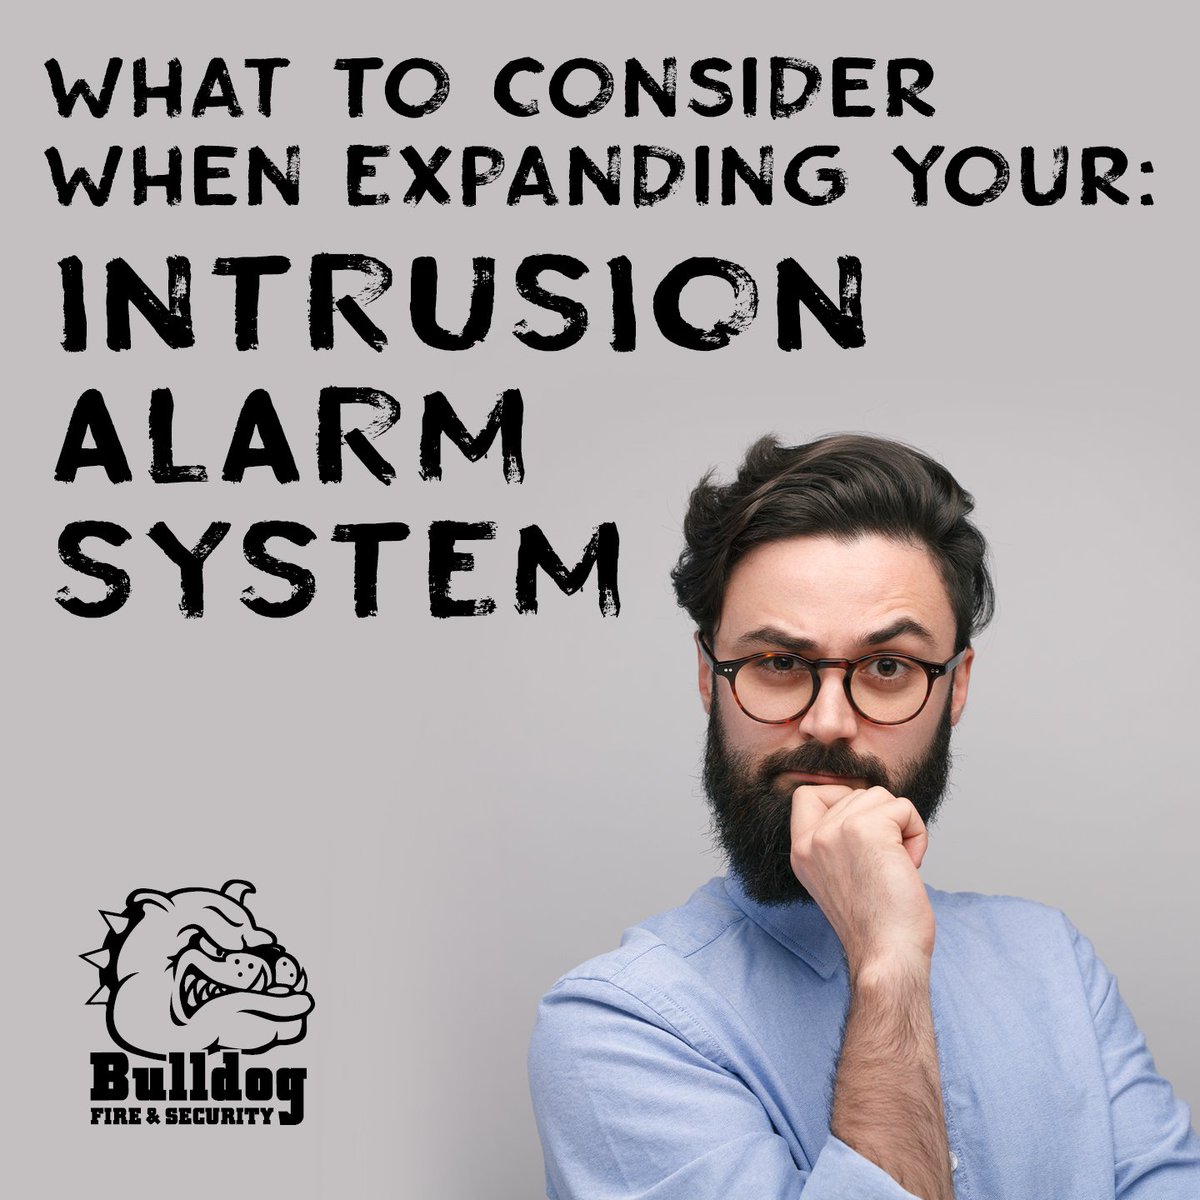 It’s important that you take a moment to consider how changes to building structure or layout will impact your intrusion alarm system.  Here are some key points to consider: bulldogfireandsecurity.com/what-to-consid… #intrusionalarmsystem #securitysystem